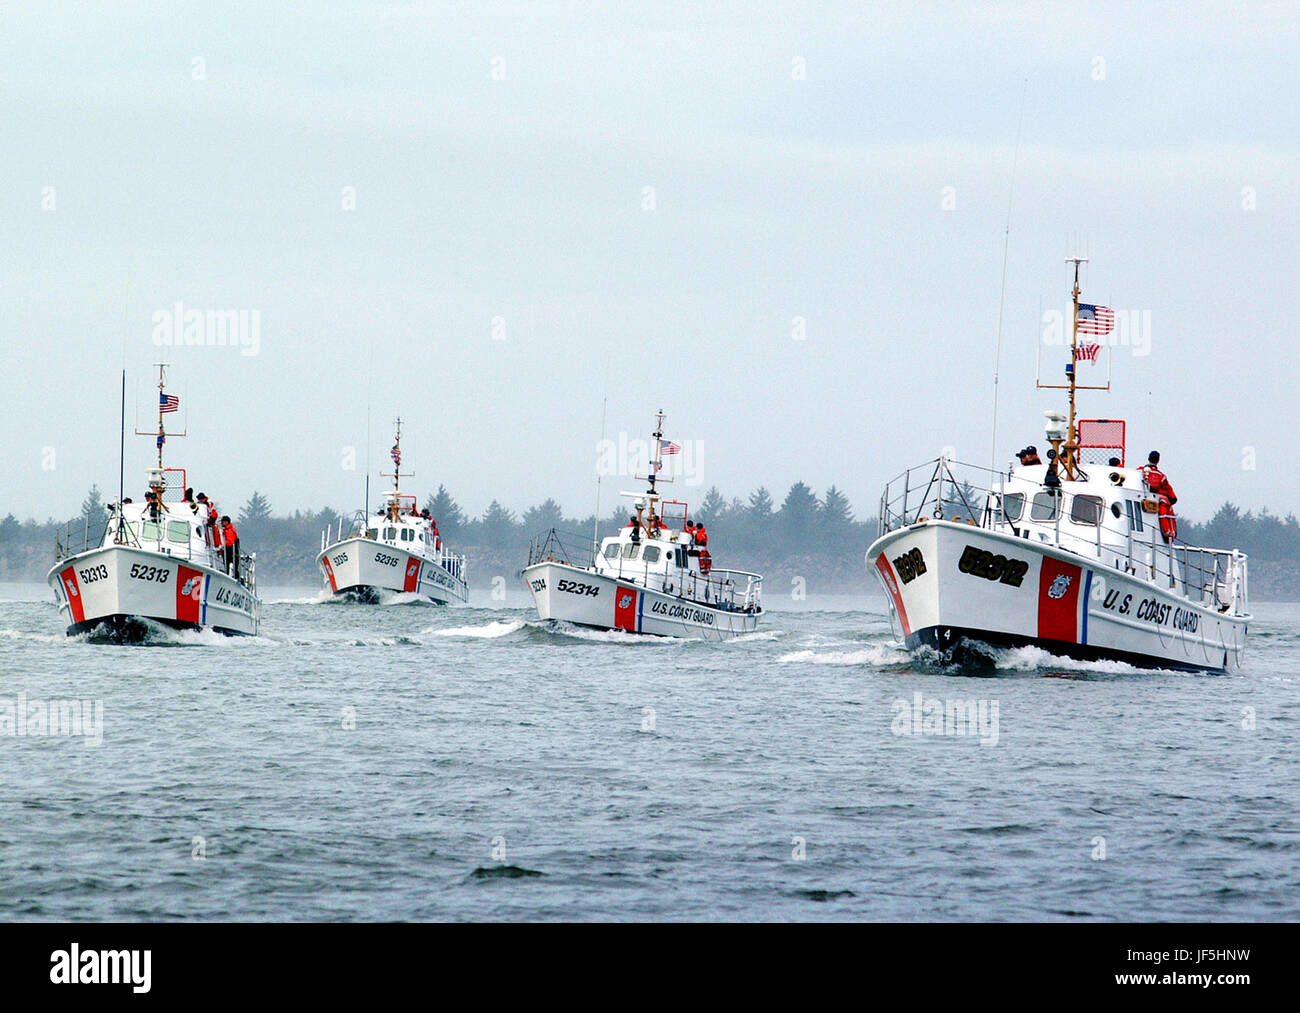 CAPE DISAPPOINTMENT, Wash. (Feb. 13, 2003)--The Coast Guard's four remaining 52-foot motor lifeboats, Invincible II, Intrepid, Triumph II and Victory get underway together for the first time since 1998 at Station Cape Disappointment, WA. Feb. 13, 2003. The 52-foot motor life boats are widely used in support of search and rescue, maritime law enforcement, marine environmental protection and recreational boating safety.   USCG photo by PA3 Kurt Fredrickson Stock Photo